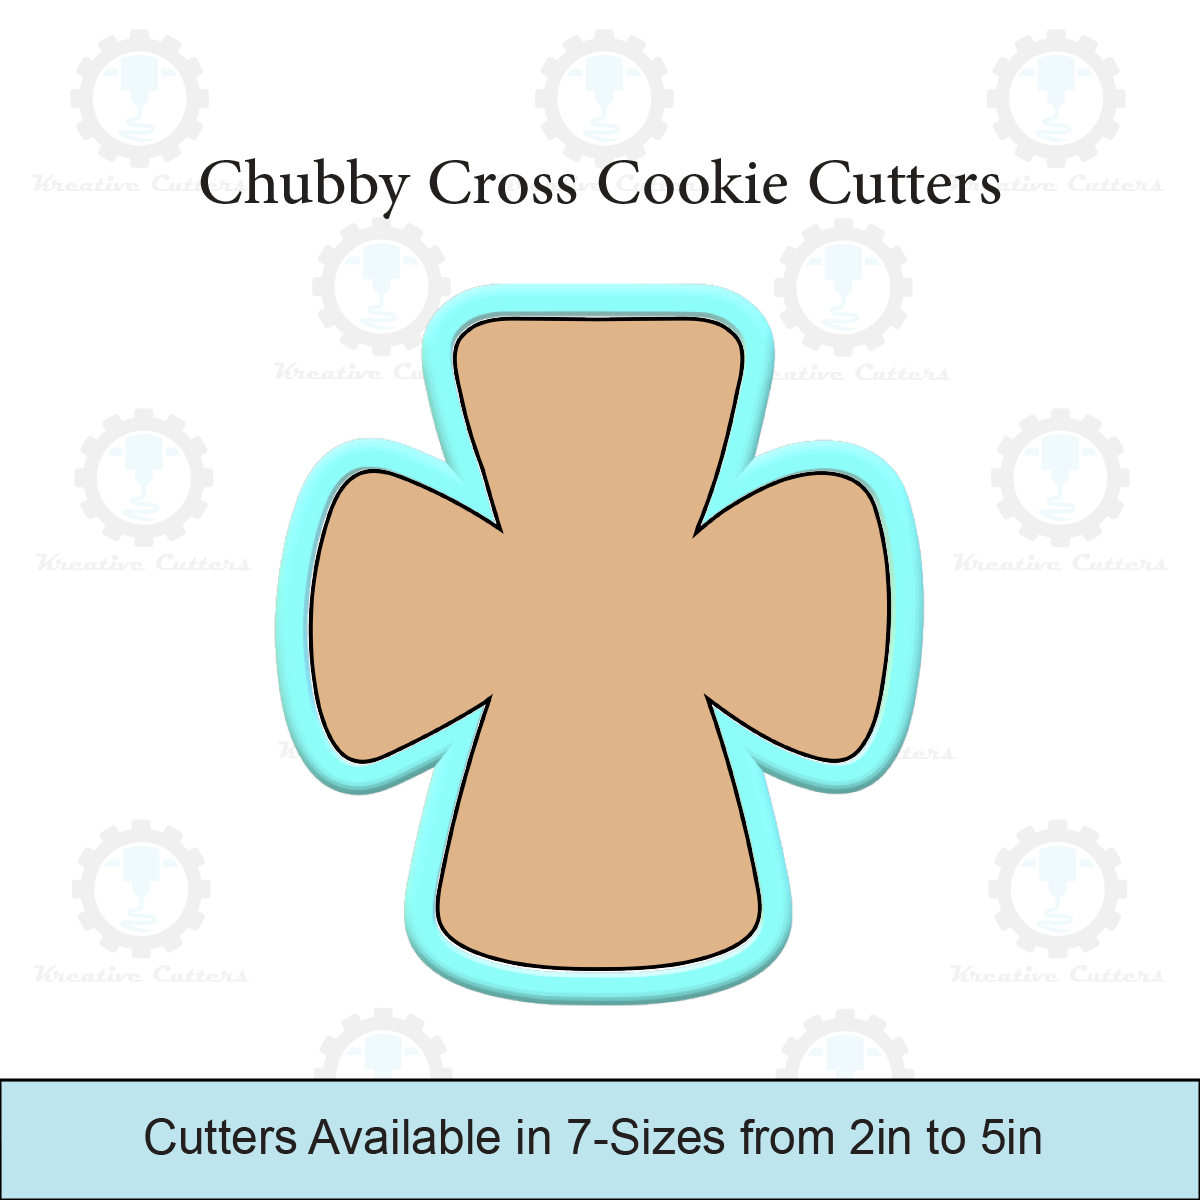 Chubby Cross Cookie Cutters